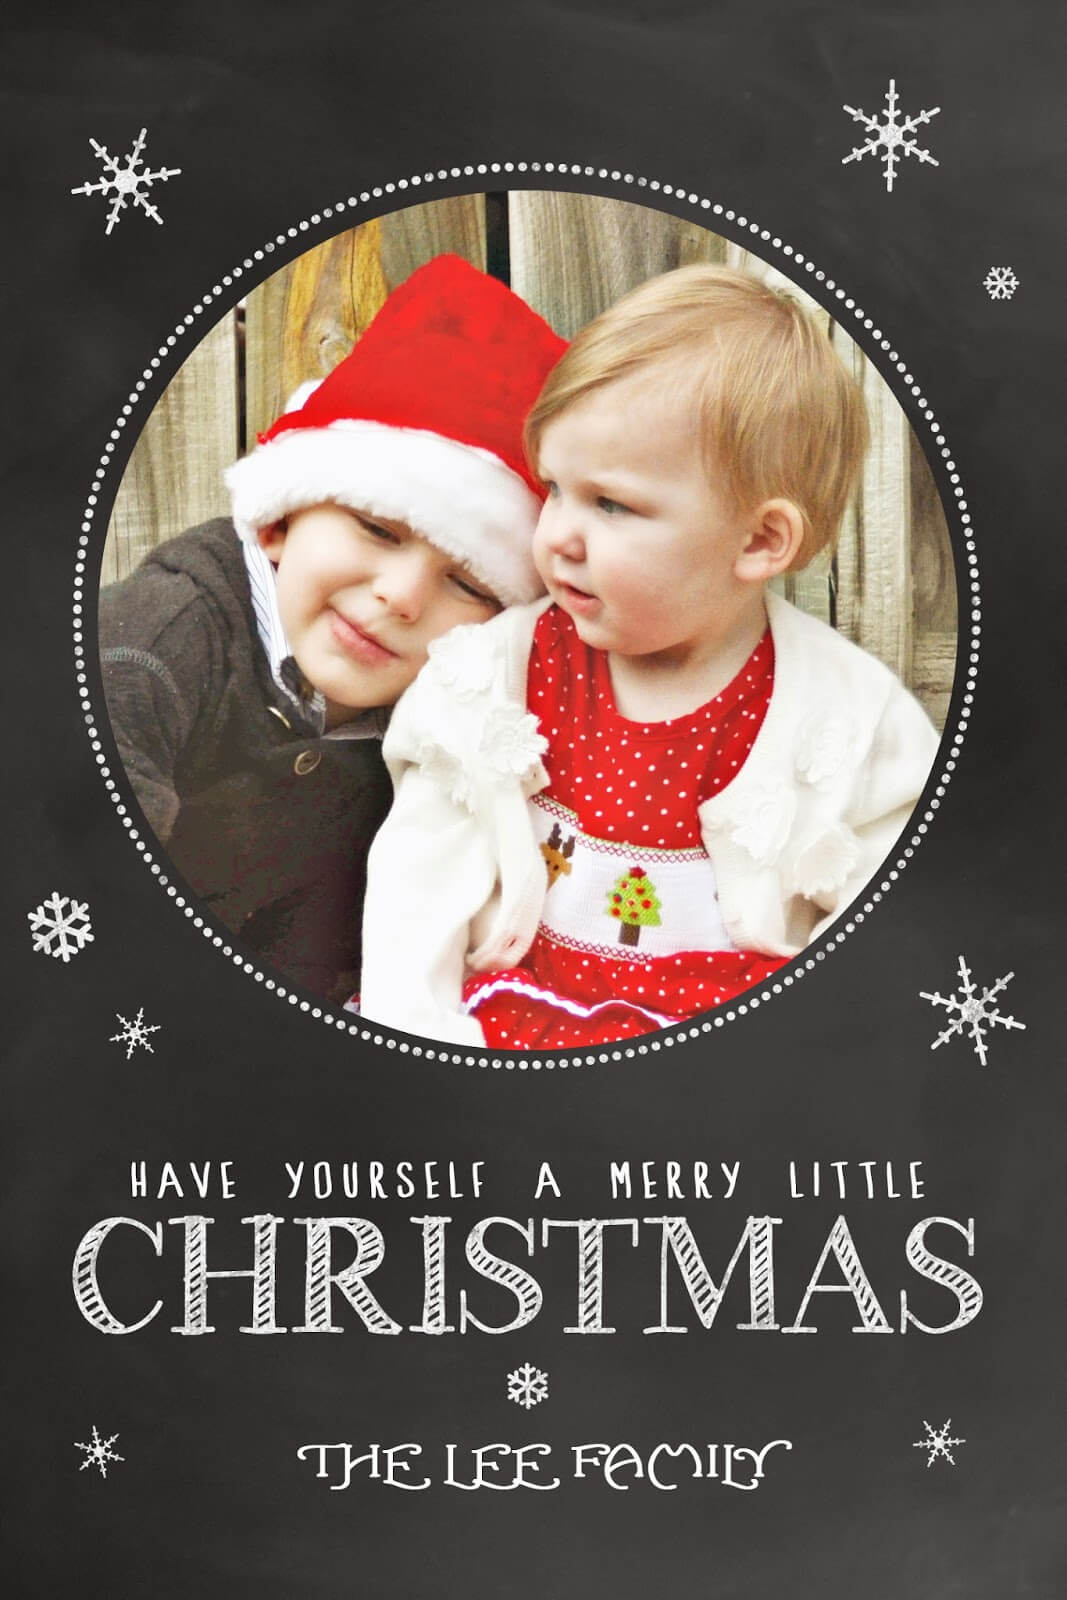 Free Christmas Card Templates – Mother's Day Intended For Free Christmas Card Templates For Photoshop